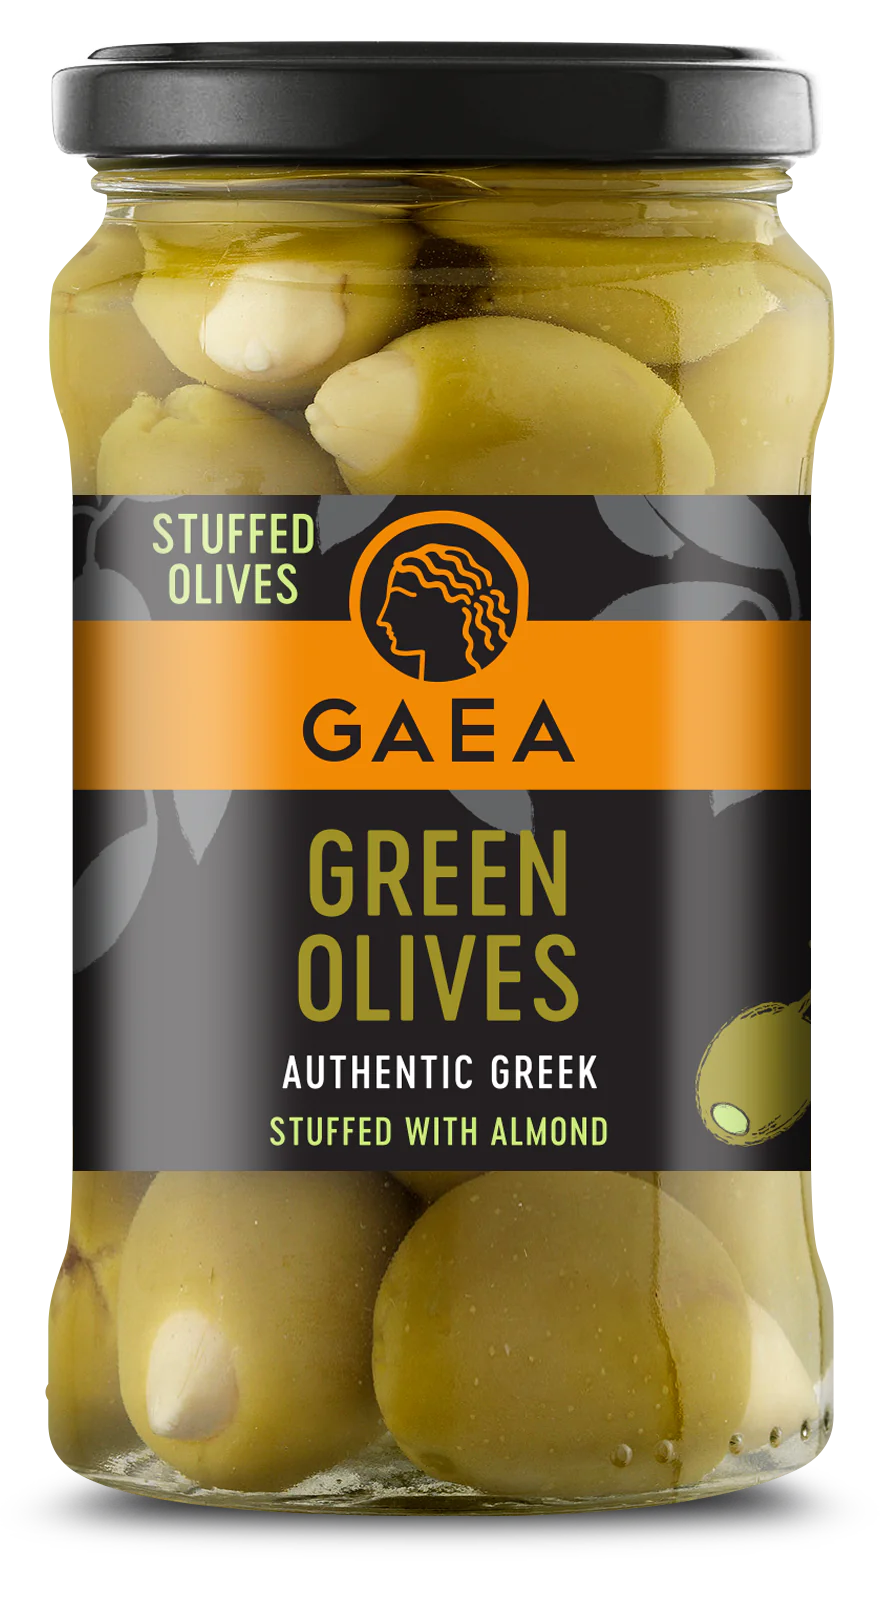 Gaea green olives stuffed with almond photo 1